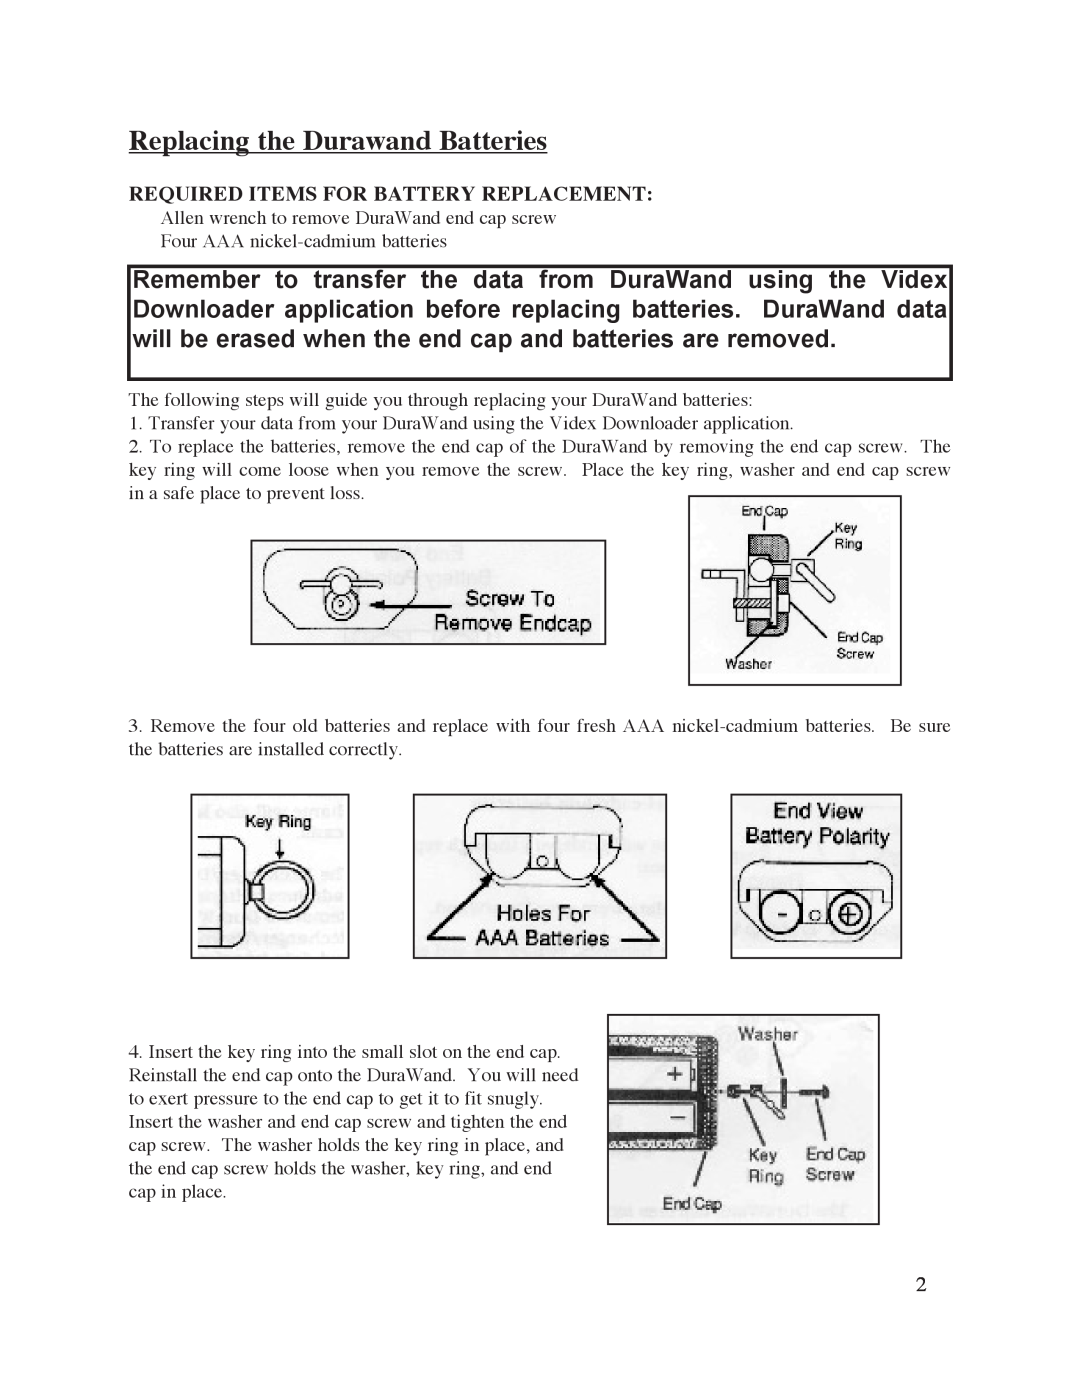 Keyspan DuraWand Portable Scanner manual Replacing the Durawand Batteries, Required Items For Battery Replacement 